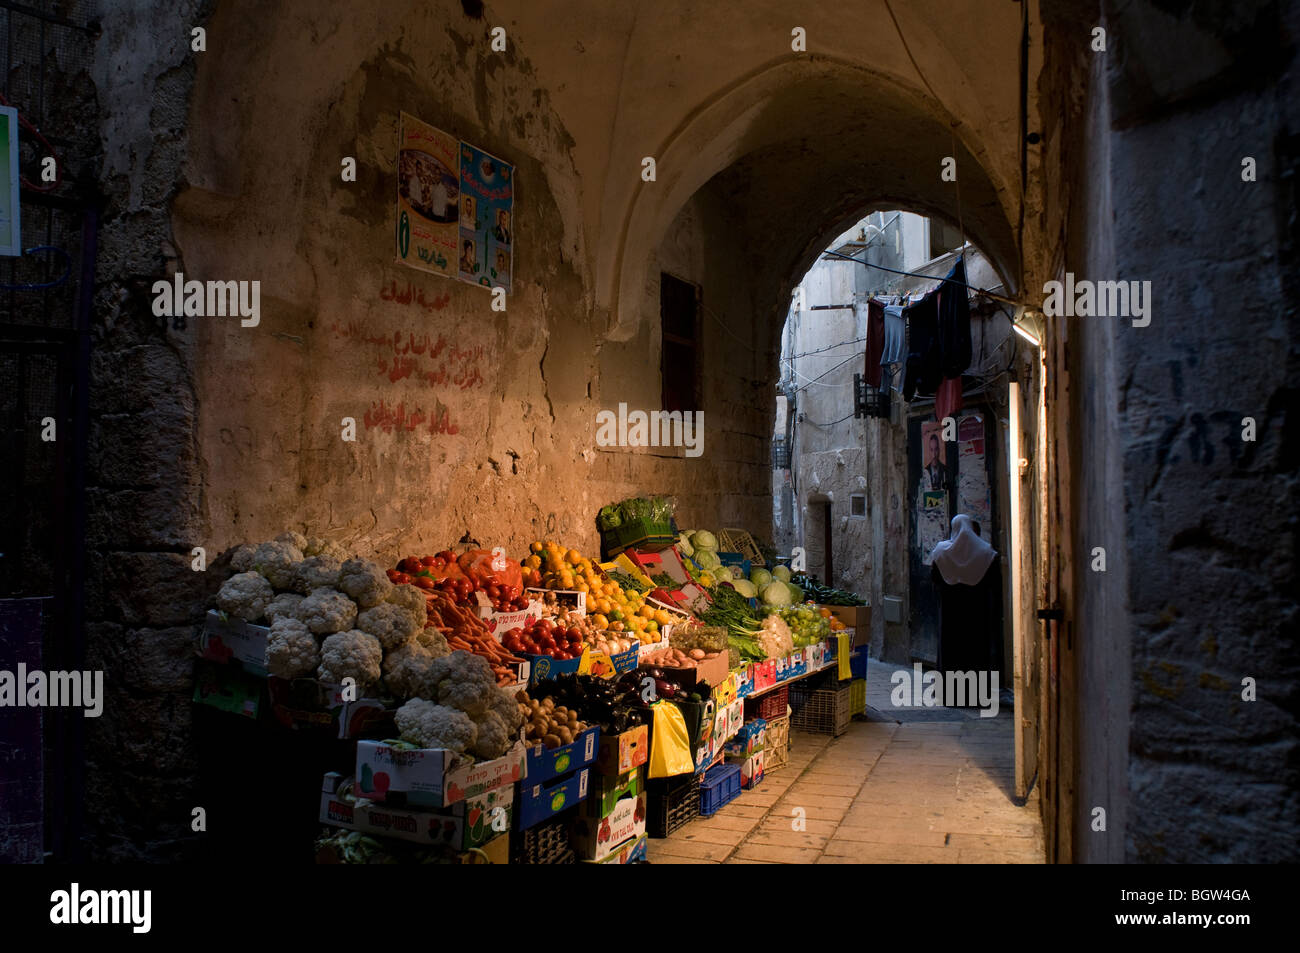 Vegetable stall in the old city market in Akko or Acre Northern Israel Stock Photo